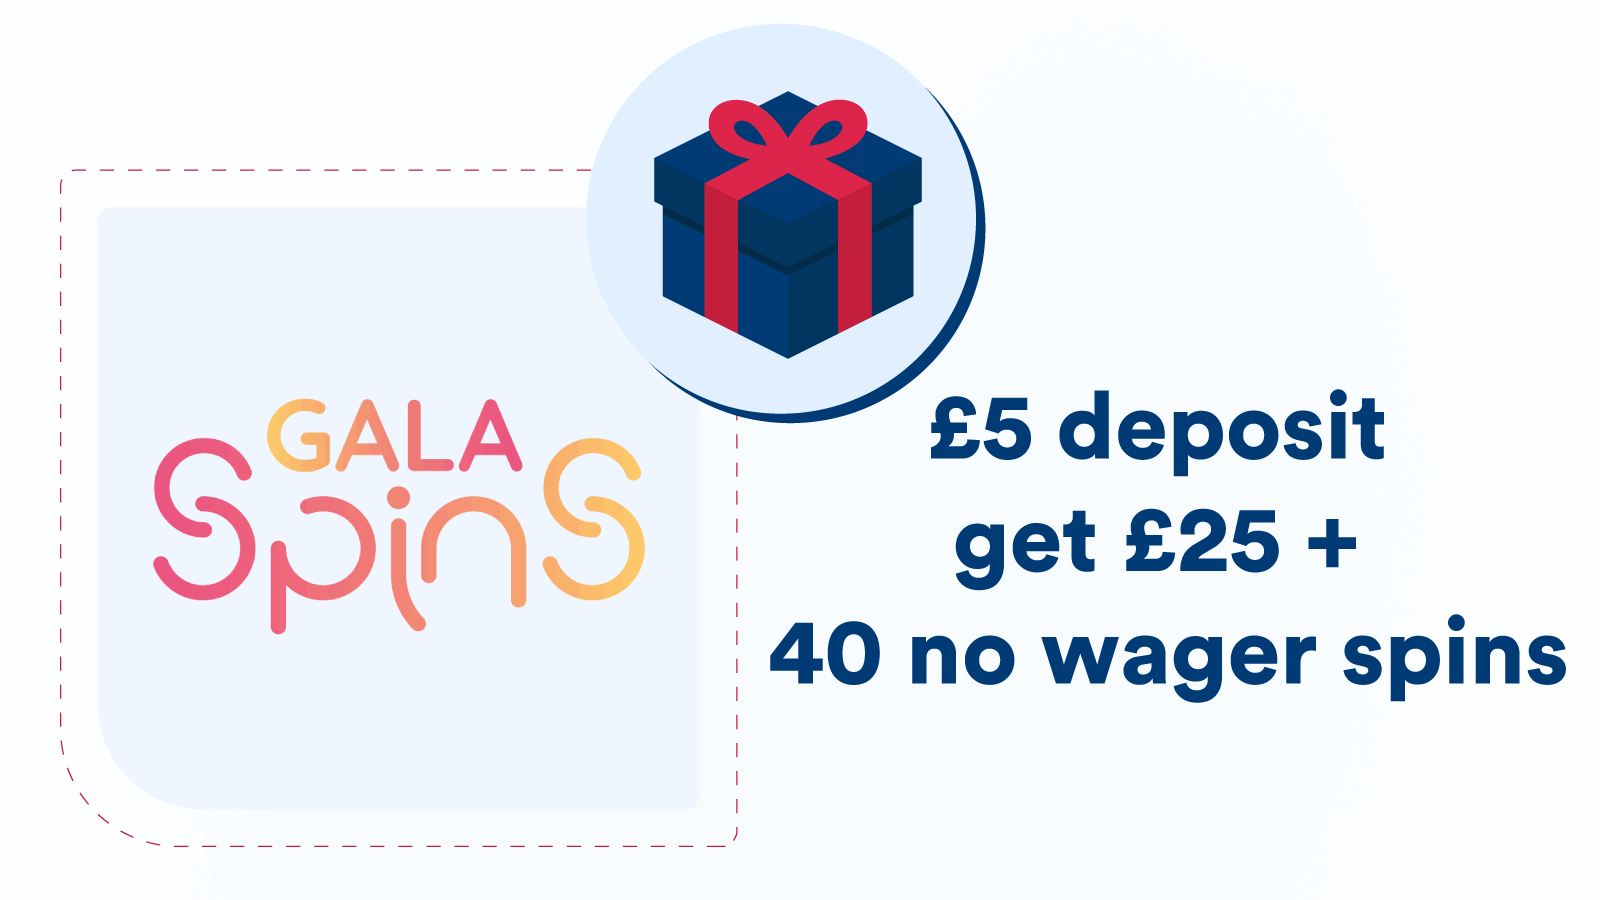 Best pick for a £5 deposit – get £25 + 40 no wager spins at Gala Spins